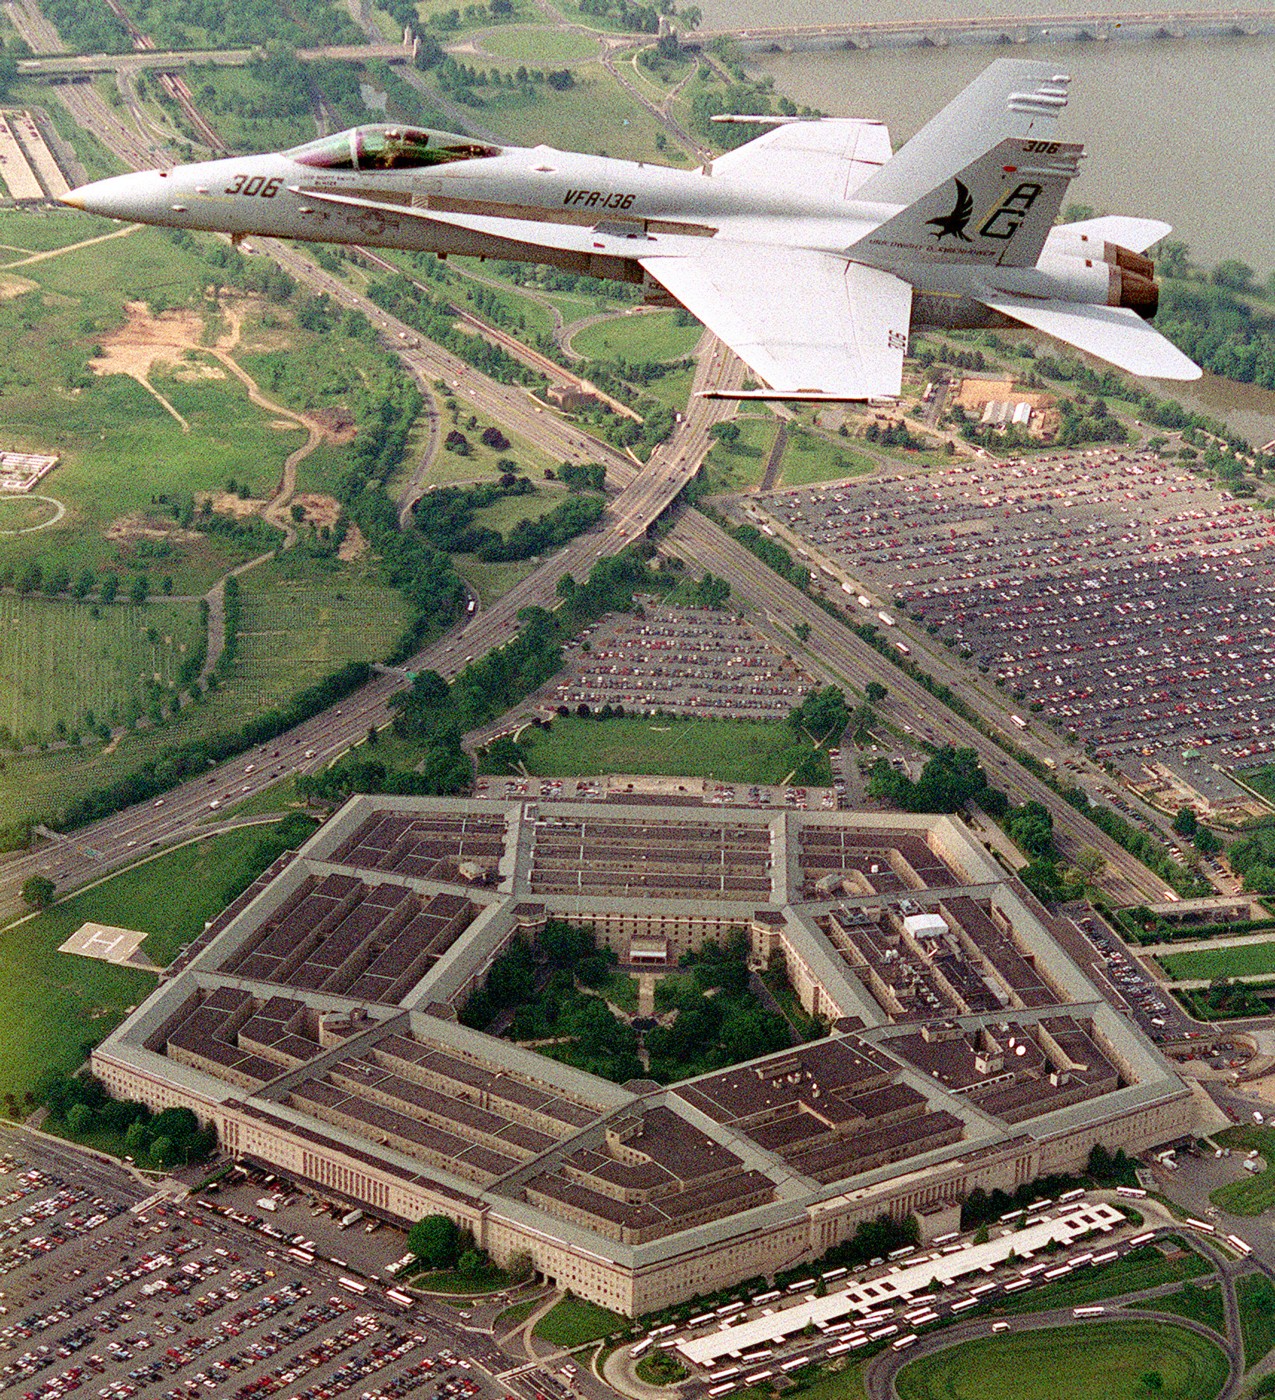 vfa-136 knighthawks strike fighter squadron f/a-18c hornet 1992 59 cvw-7 carrier air wing over pentagon